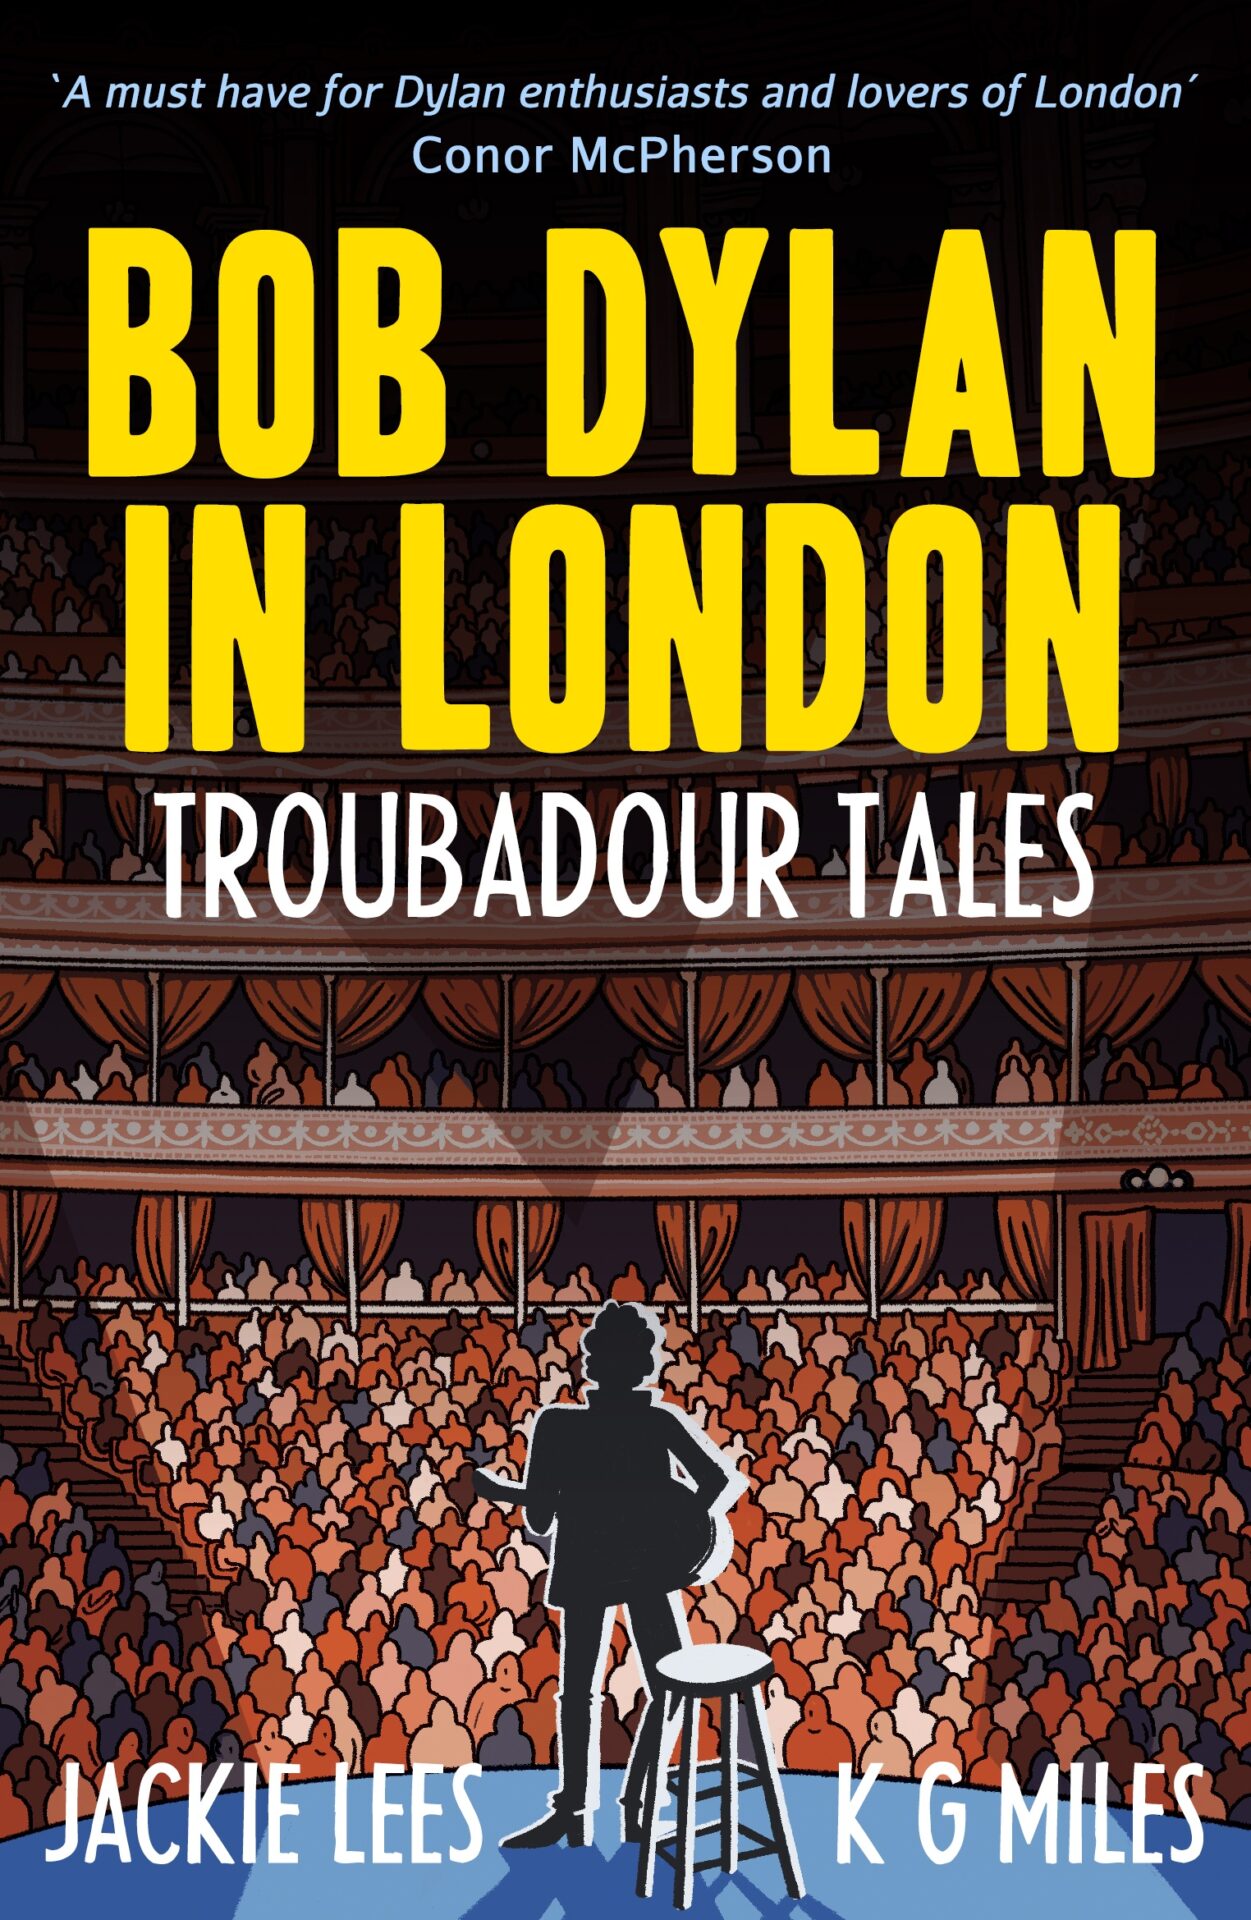 BOOK REVIEW: Bob Dylan in London: Troubadour Tales by Jackie Lees and K G Miles